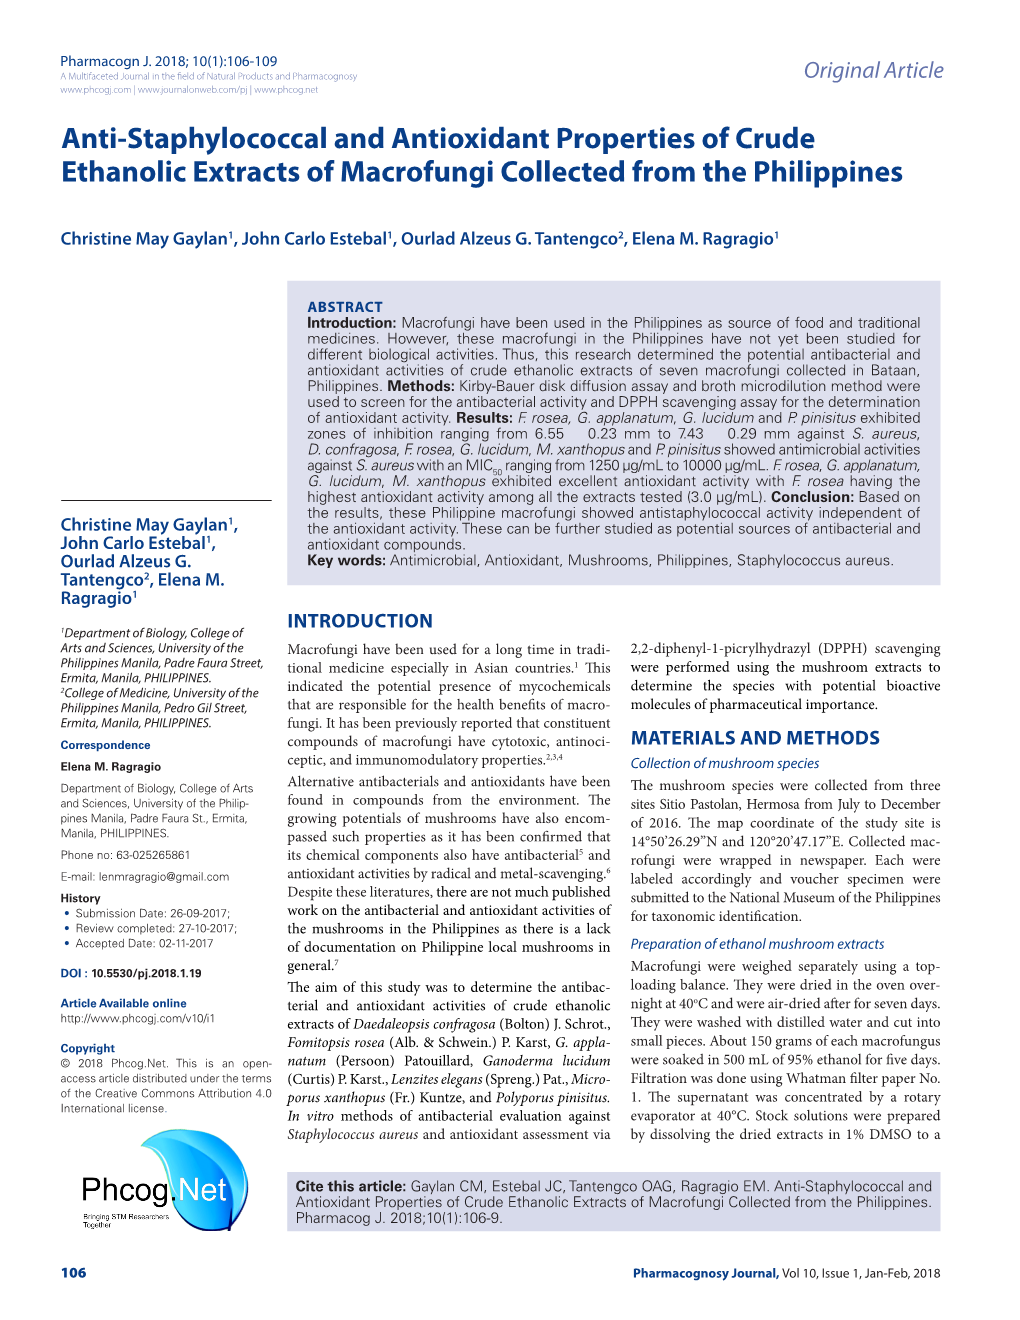 Anti-Staphylococcal and Antioxidant Properties of Crude Ethanolic Extracts of Macrofungi Collected from the Philippines